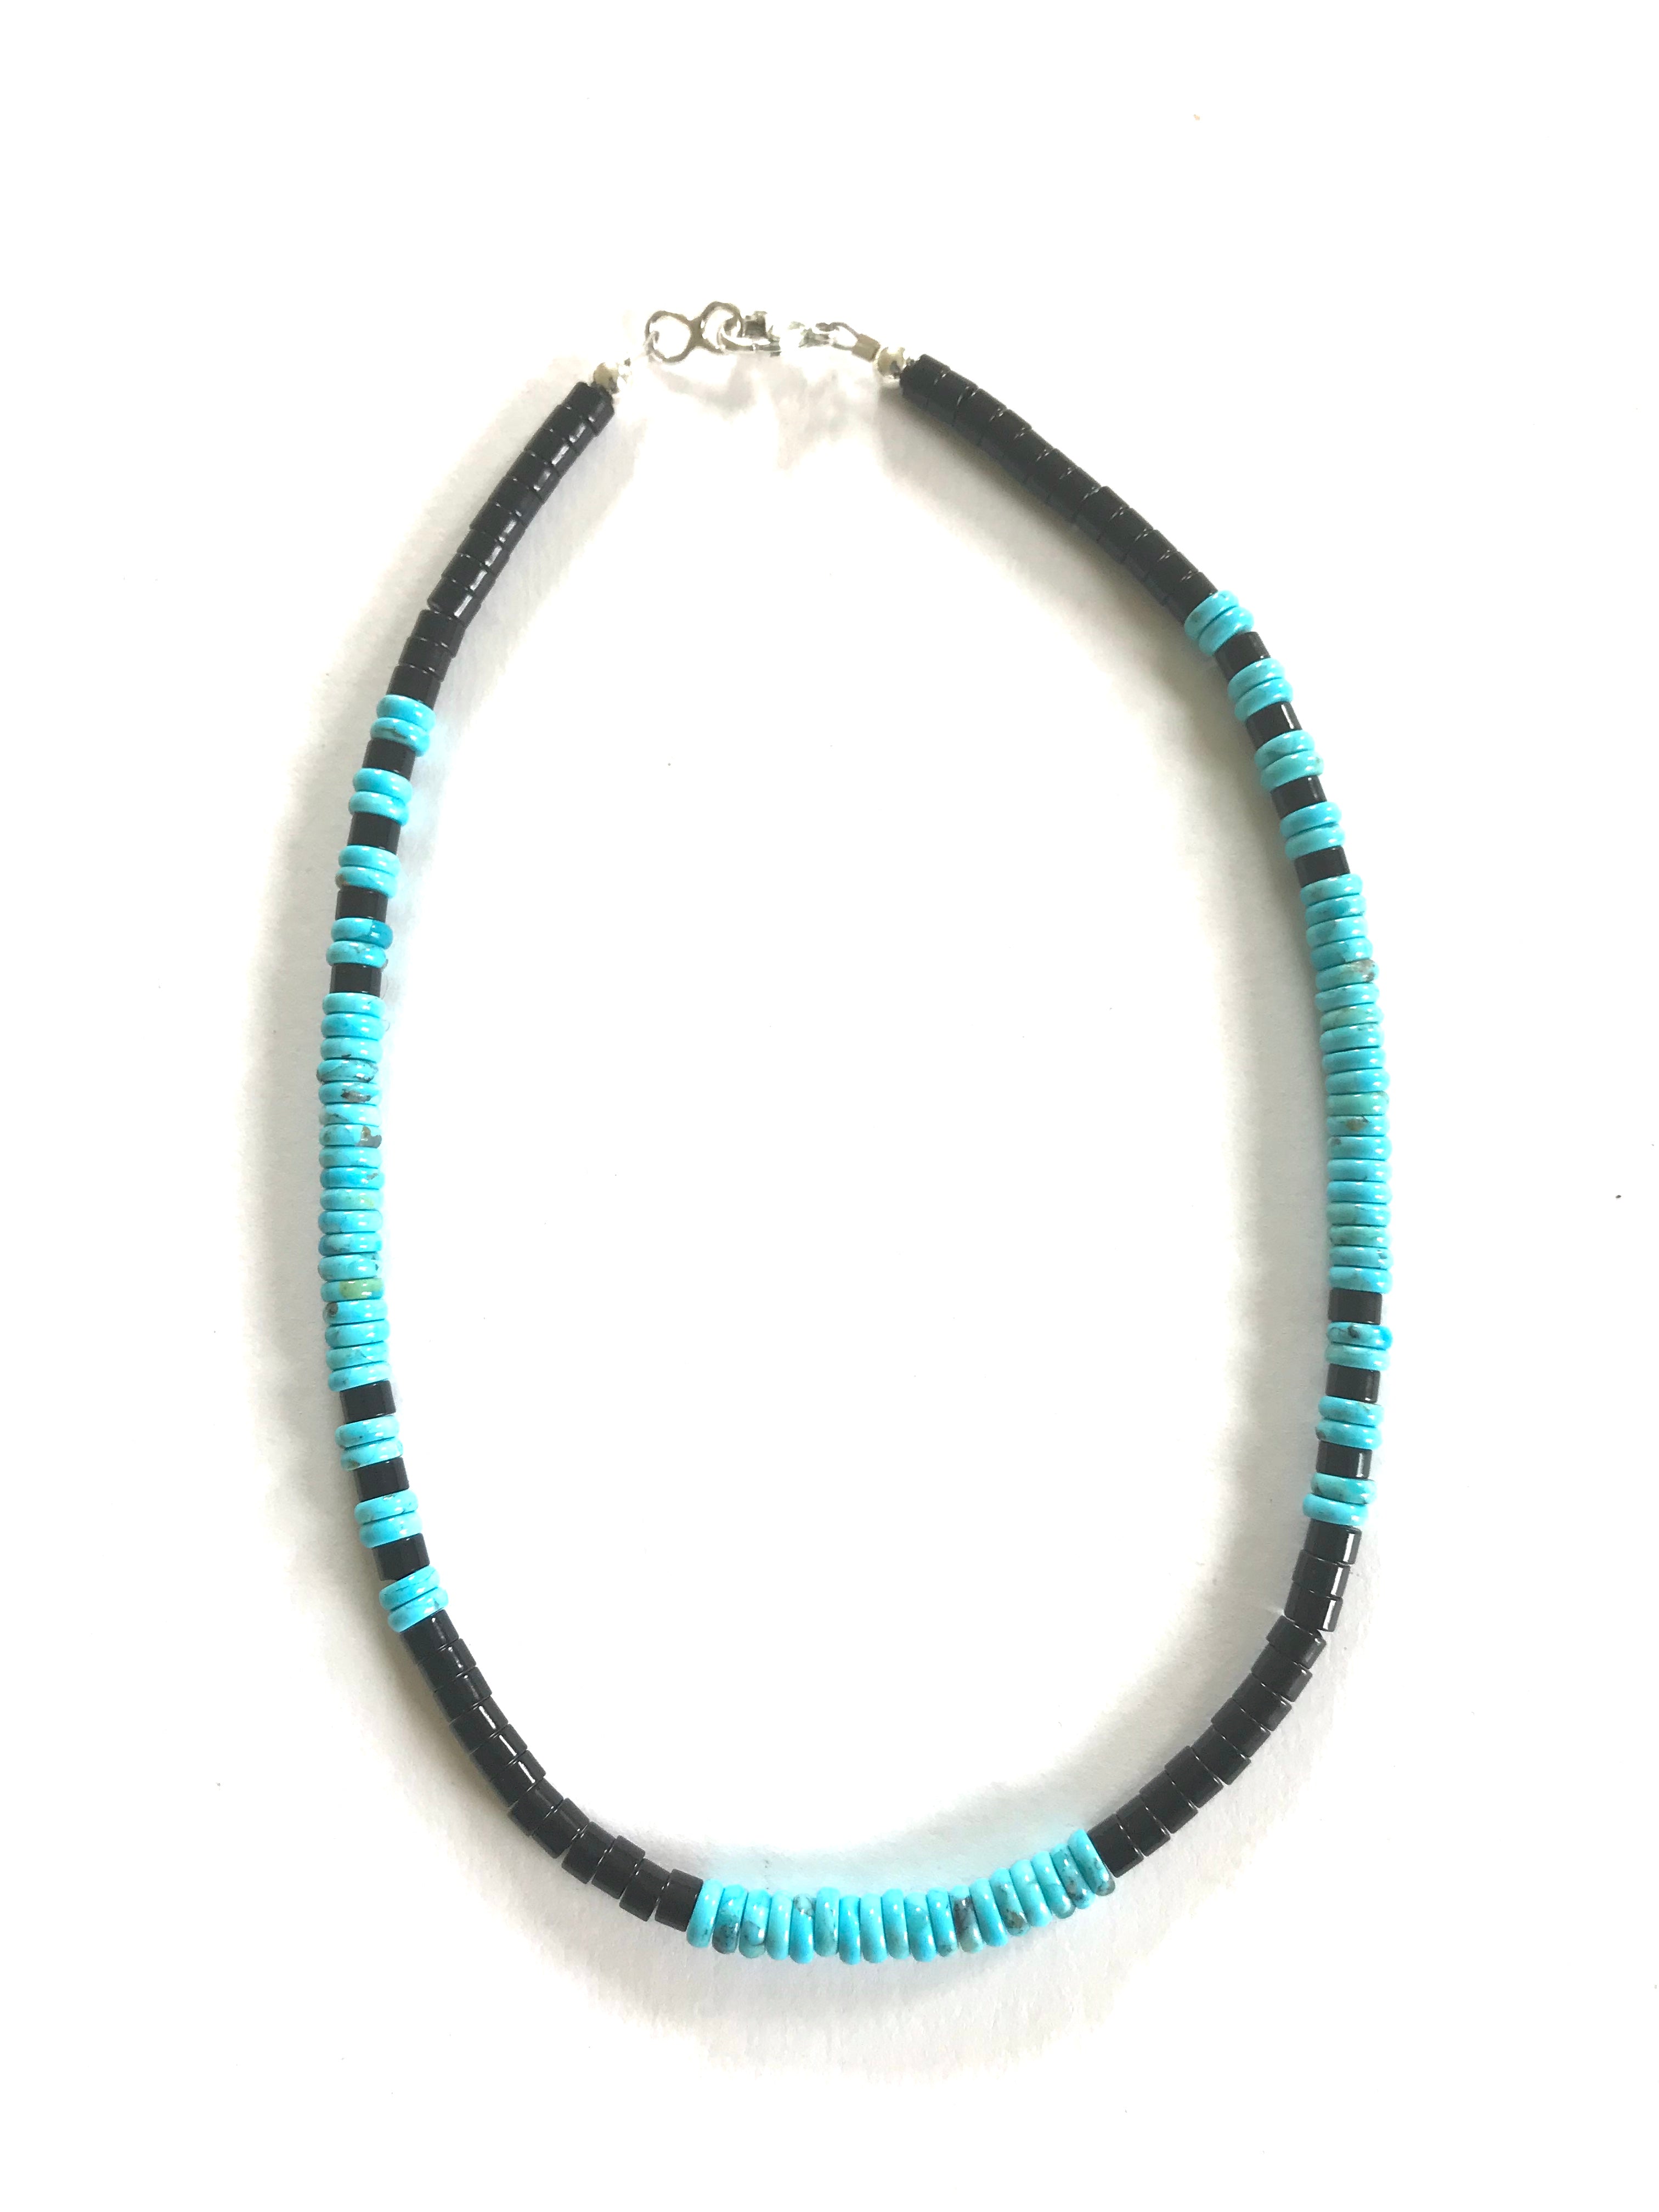 Medium width turquoise and jet necklace